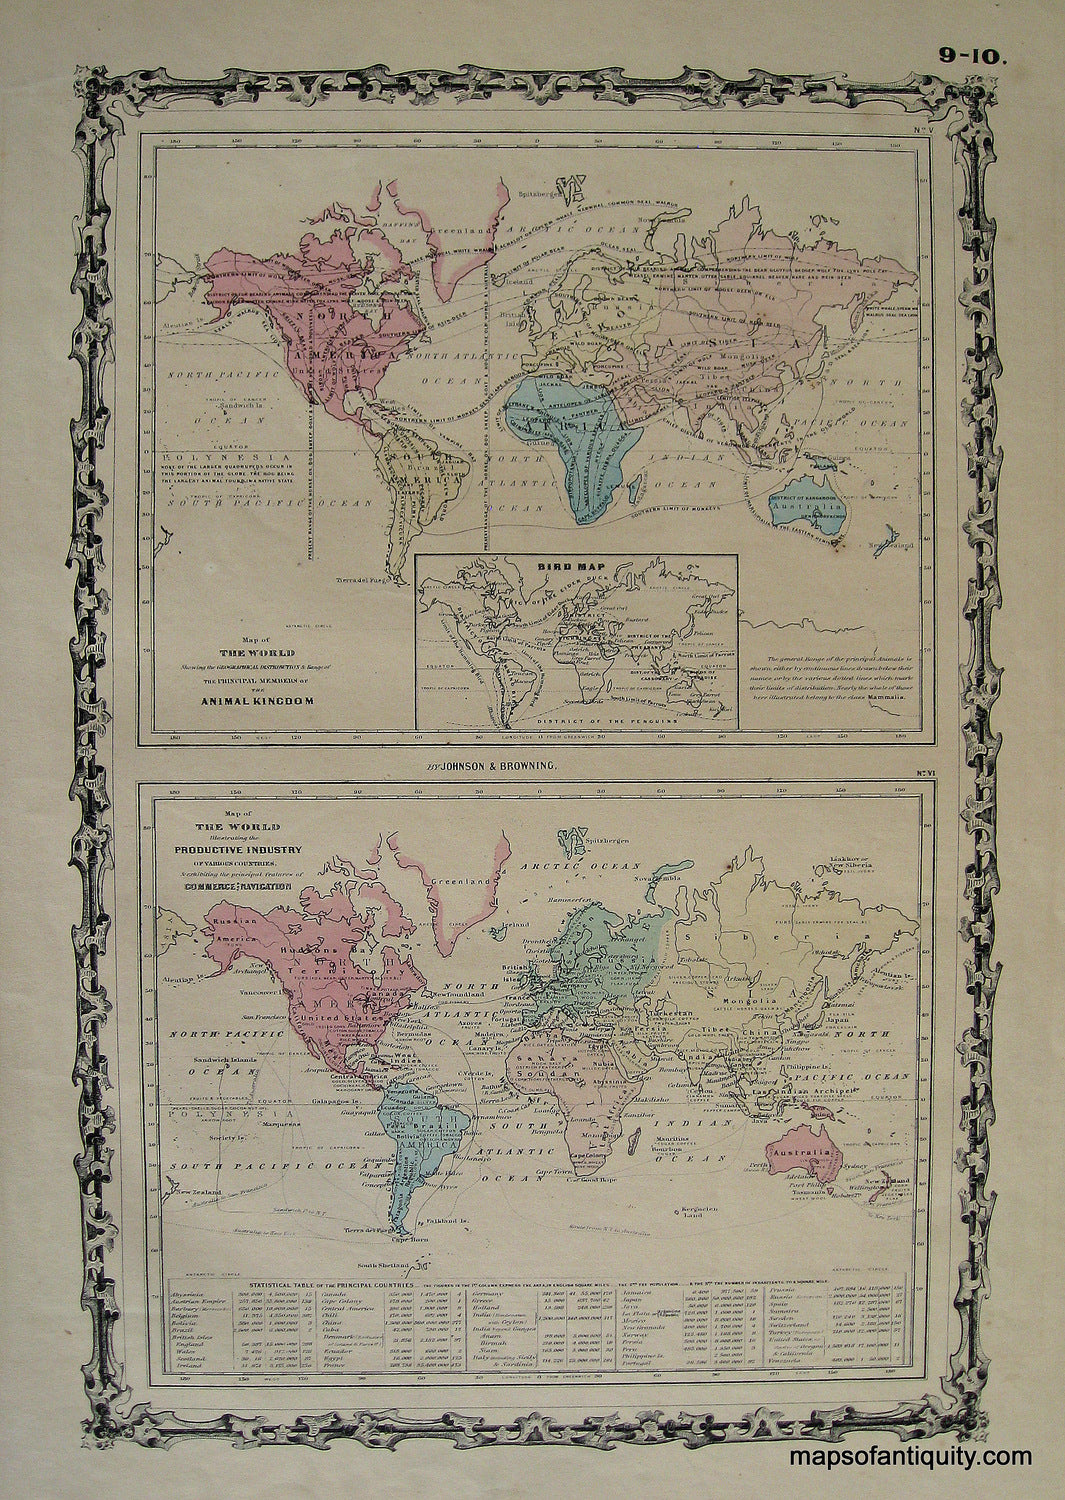 Antique-Hand-Colored-Map-World-Distribution-Map-of-the-Animal-Kingdom-the-Productive-Industry-of-Various-Countries-World--1861-Johnson-Maps-Of-Antiquity